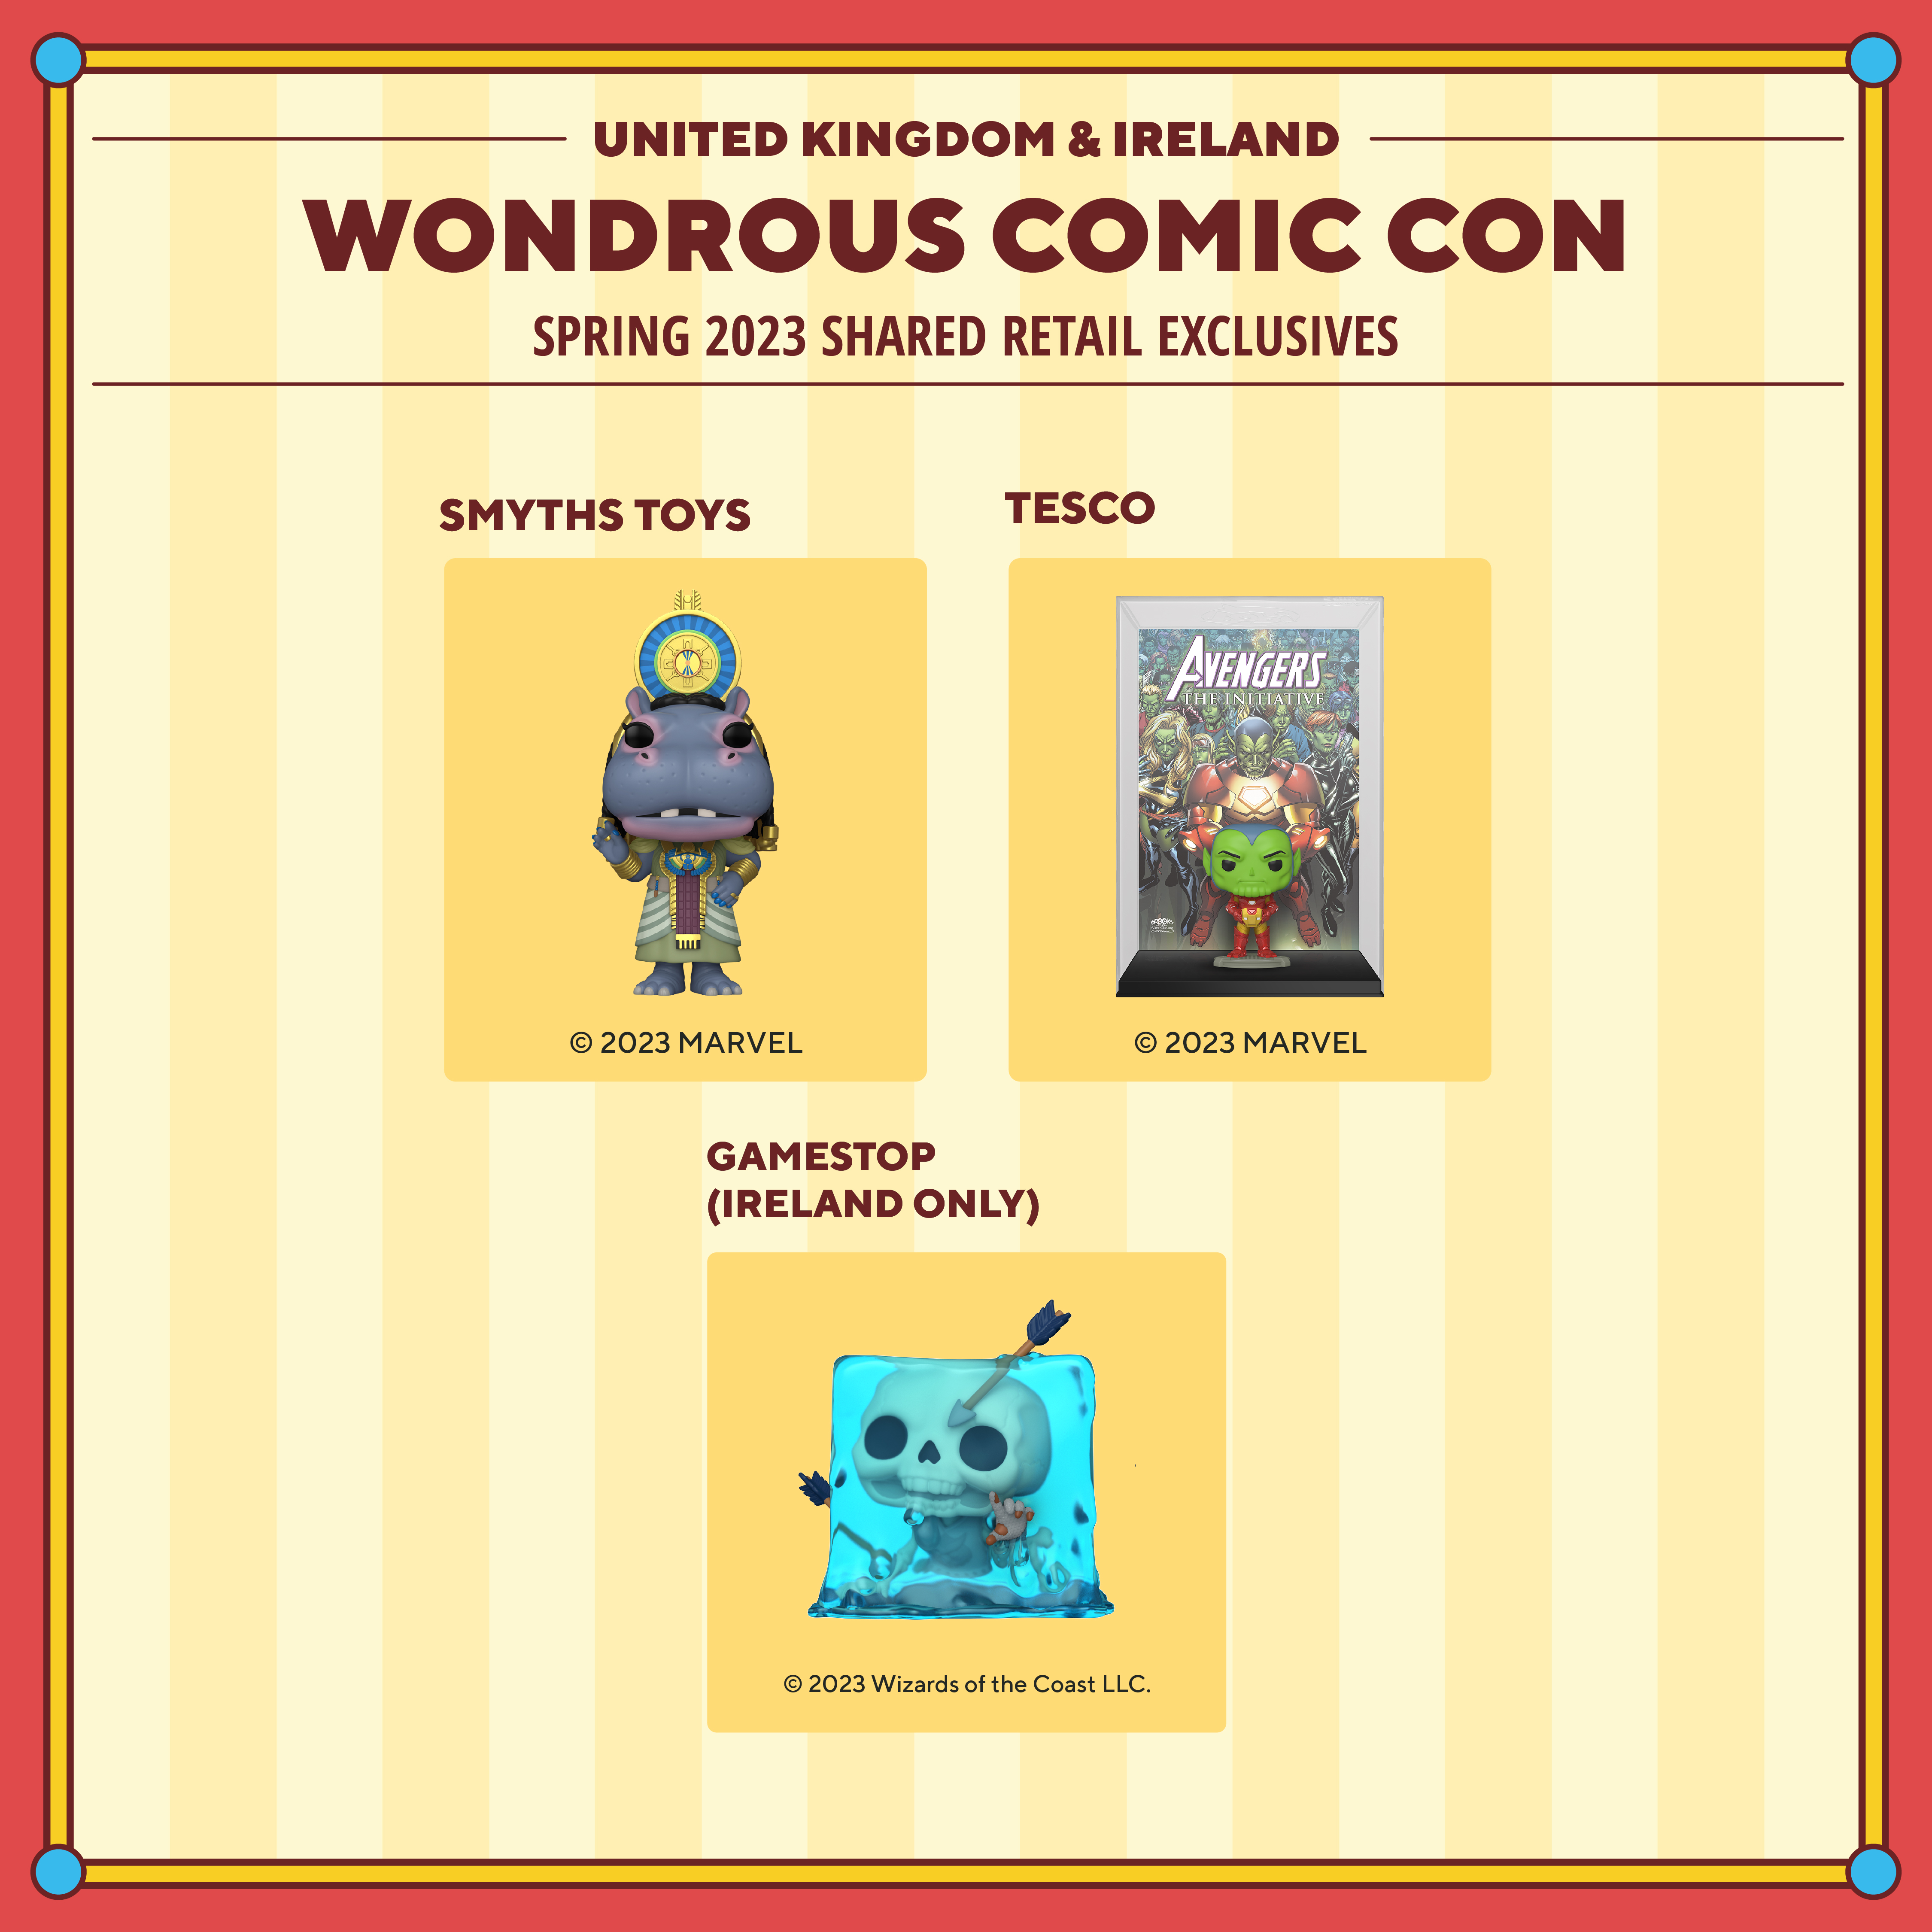 2023 WonderCon United Kingdom & Ireland spring shared retail exclusives. Smyths Toys exclusives include Pop! Taweret. Tesco exclusives include Pop! Comic Cover Skrull as Iron Man. GameStop (Ireland only) exclusives include Pop! Gelatinous Cube.